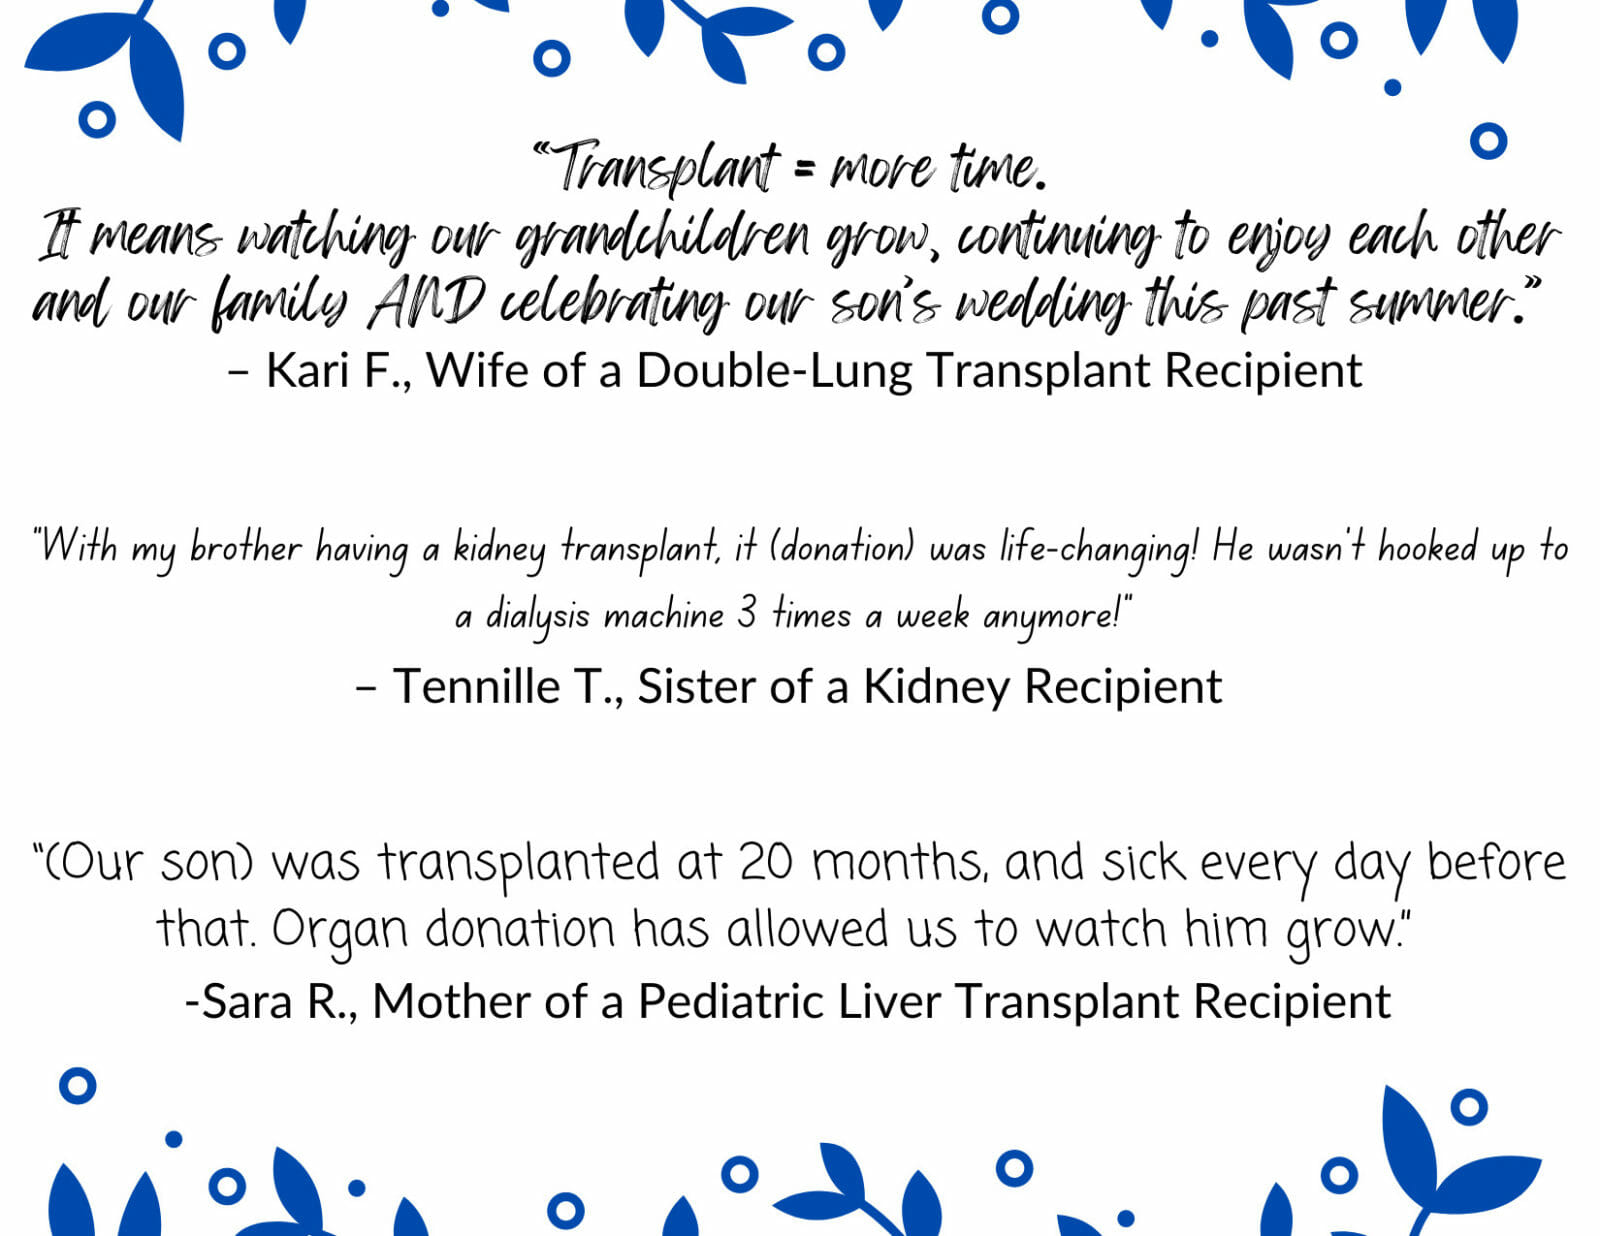 Quotes from transplant recipient family members